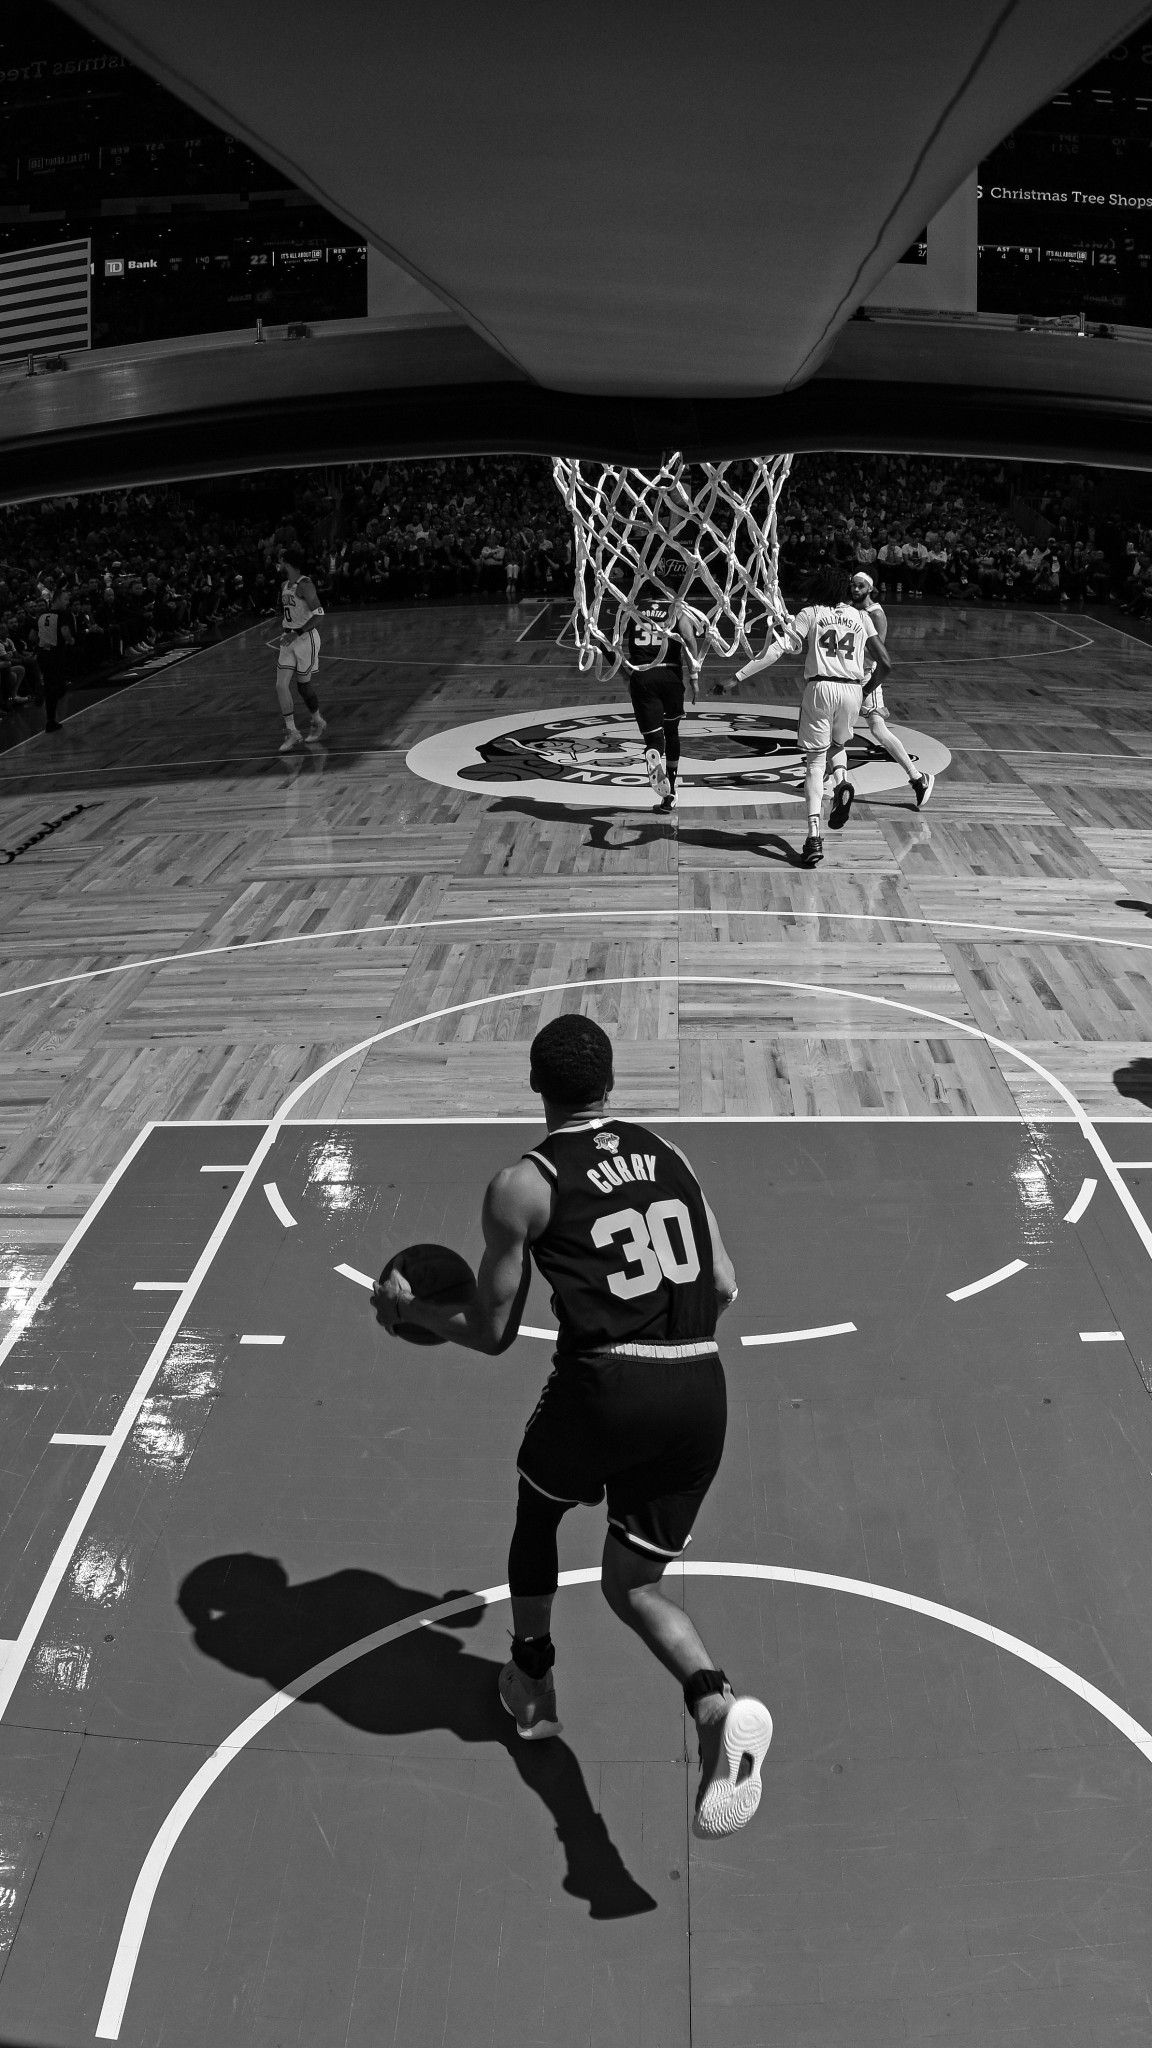 Black and white photo of a basketball player on the court - NBA